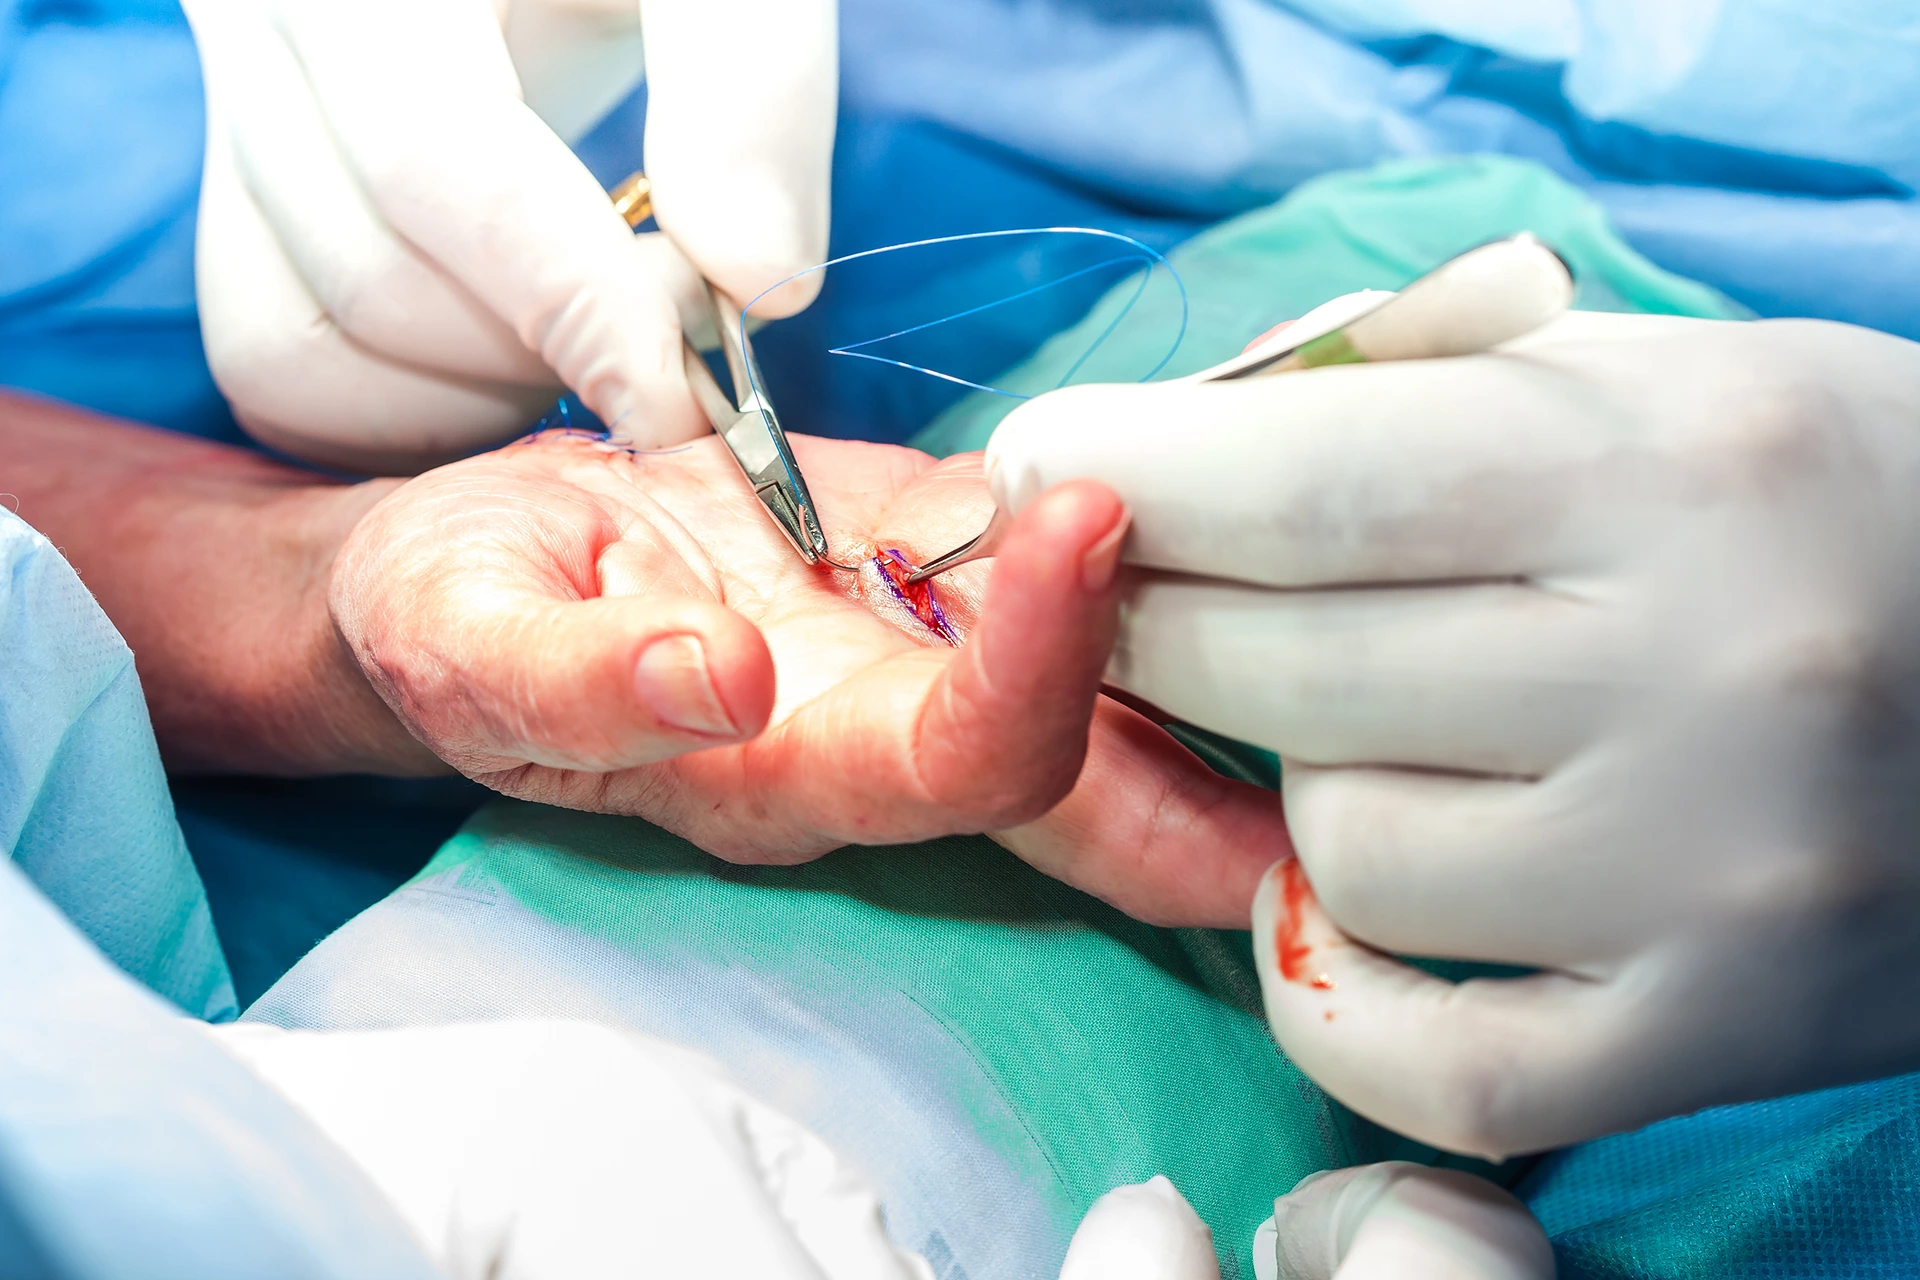 A hand is being operated on by a surgeon.